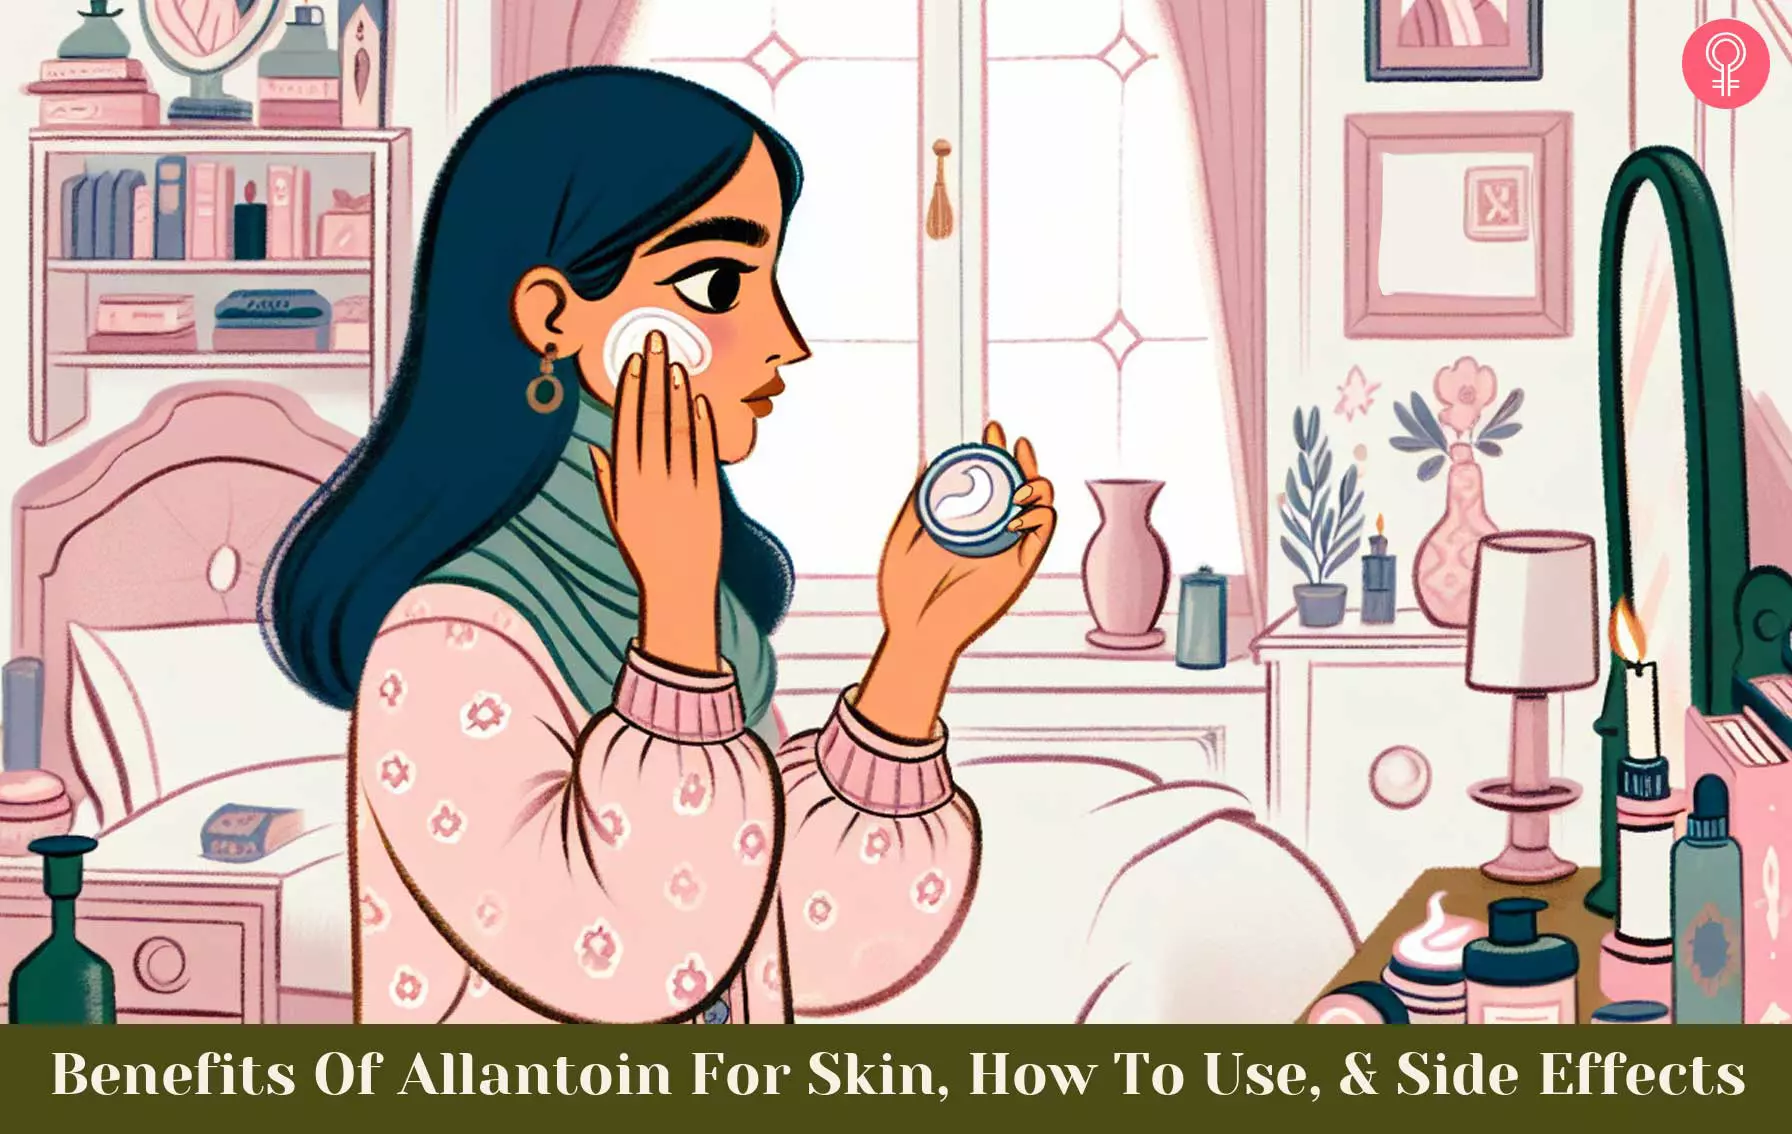 6 Benefits Of Allantoin For Skin, How To Use, & Side Effects